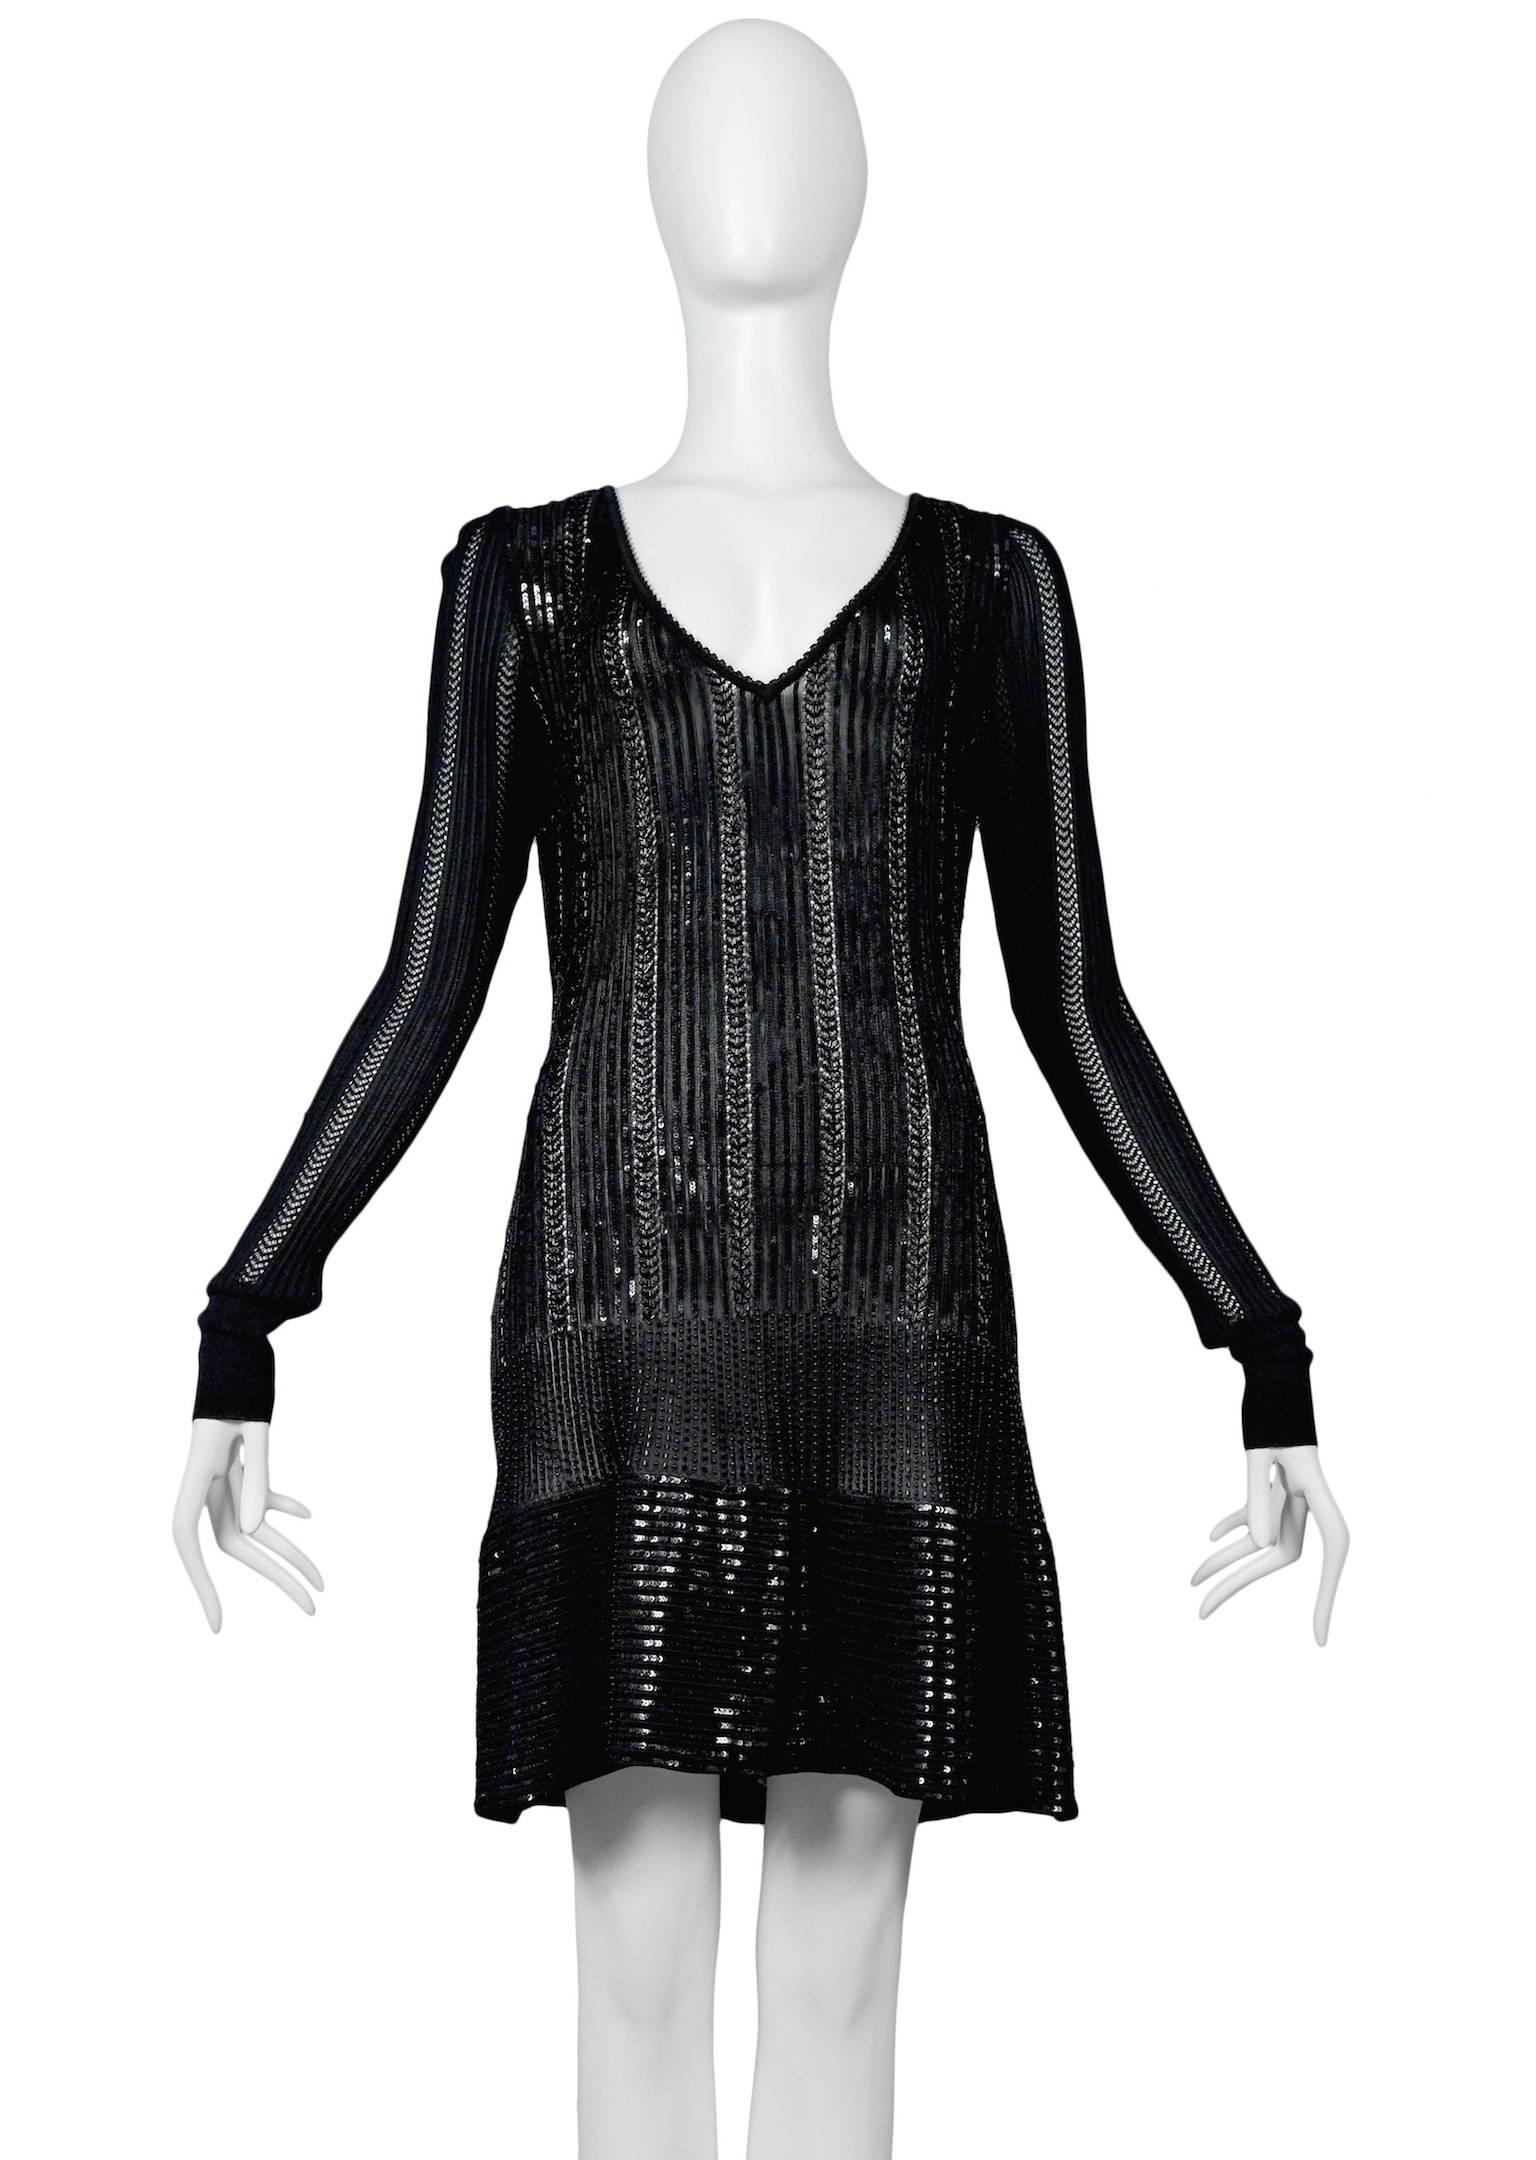 Vintage Azzedine Alaia black open and tight knit bodycon dress covered with black beads. Dress features slim body, slim long sleeves with cuffs, deep V neck and two panels of alternating beads. Stunning example from the 1996 collection. Excellent